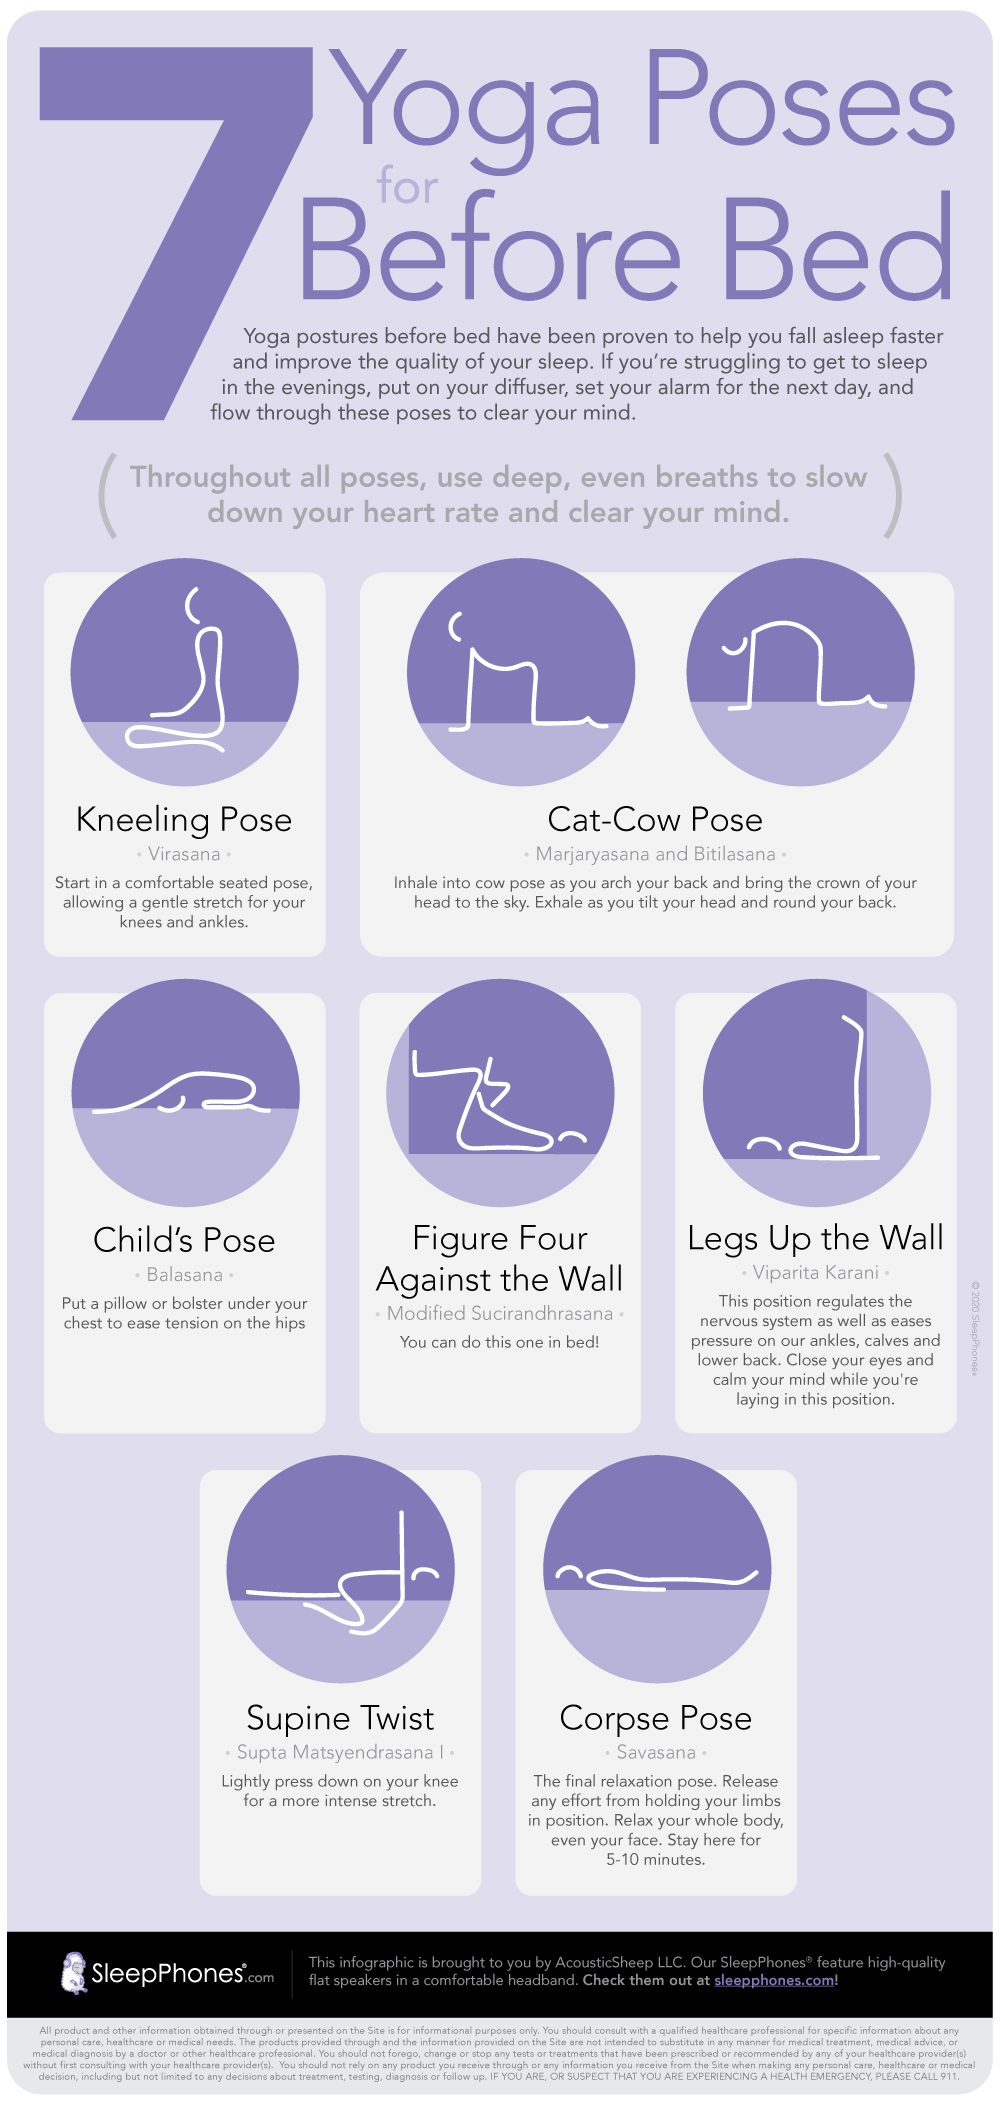 7 Yoga Poses for Before Bed